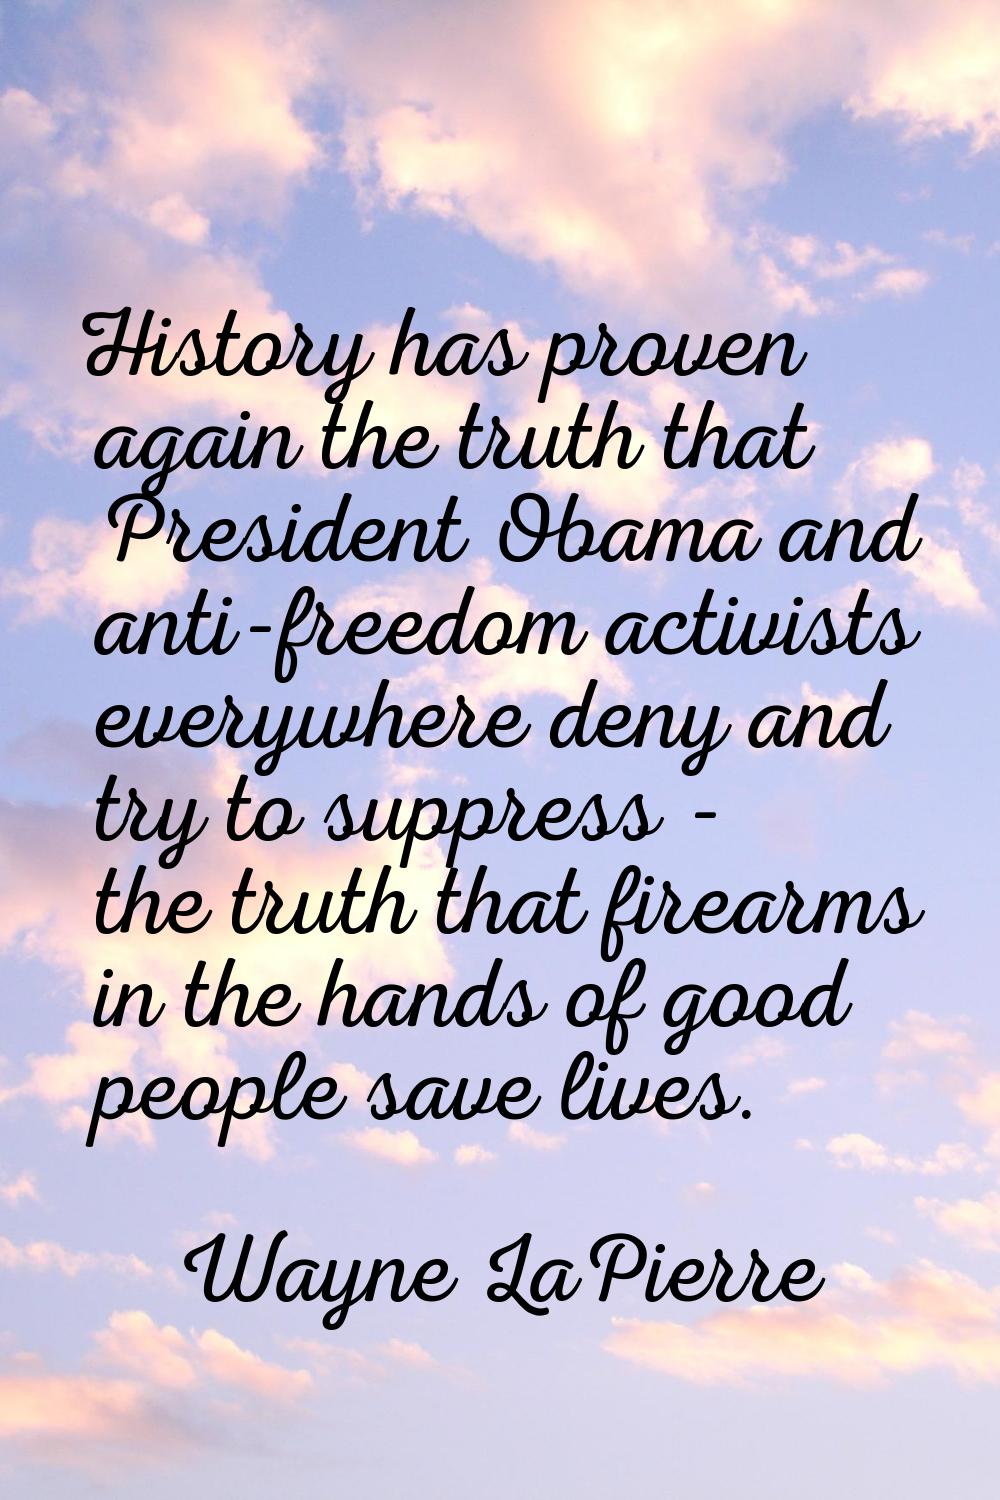 History has proven again the truth that President Obama and anti-freedom activists everywhere deny 